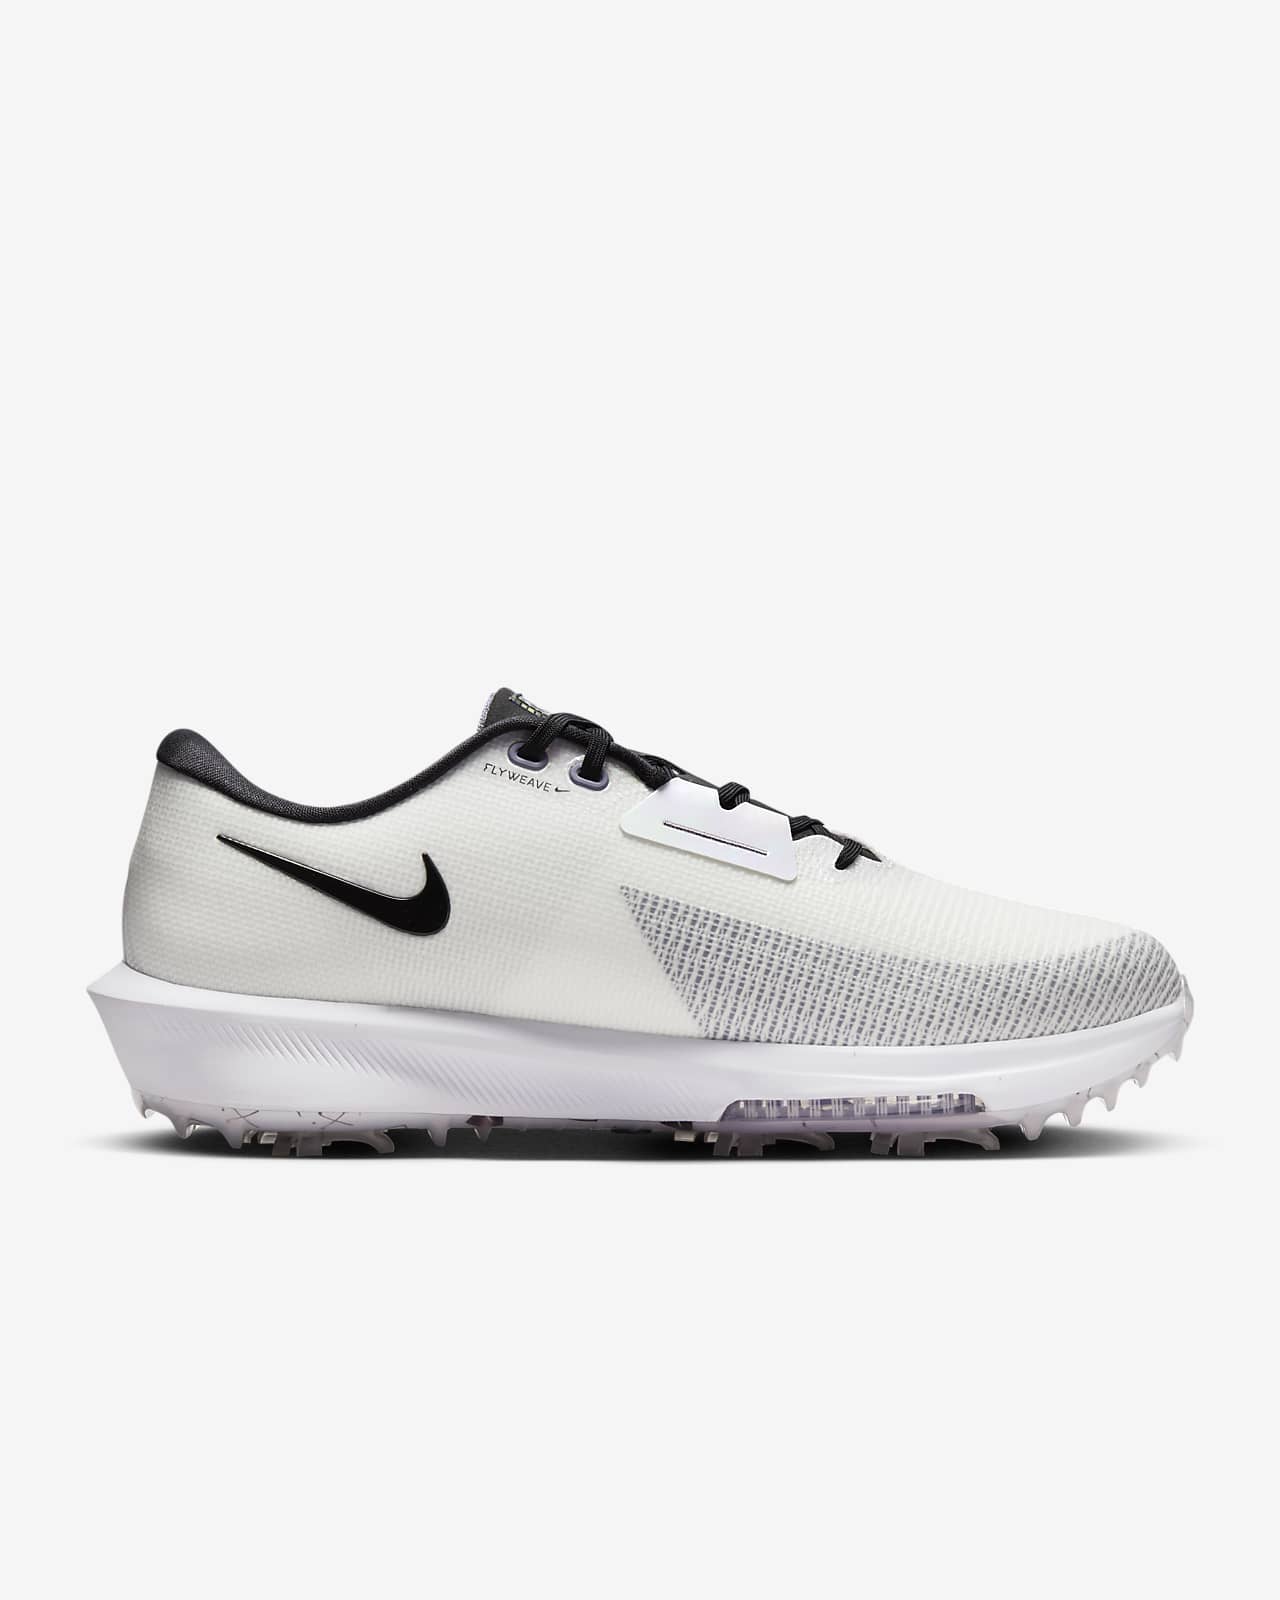 Nike Air Zoom Infinity Tour NRG Golf Shoes (Wide)